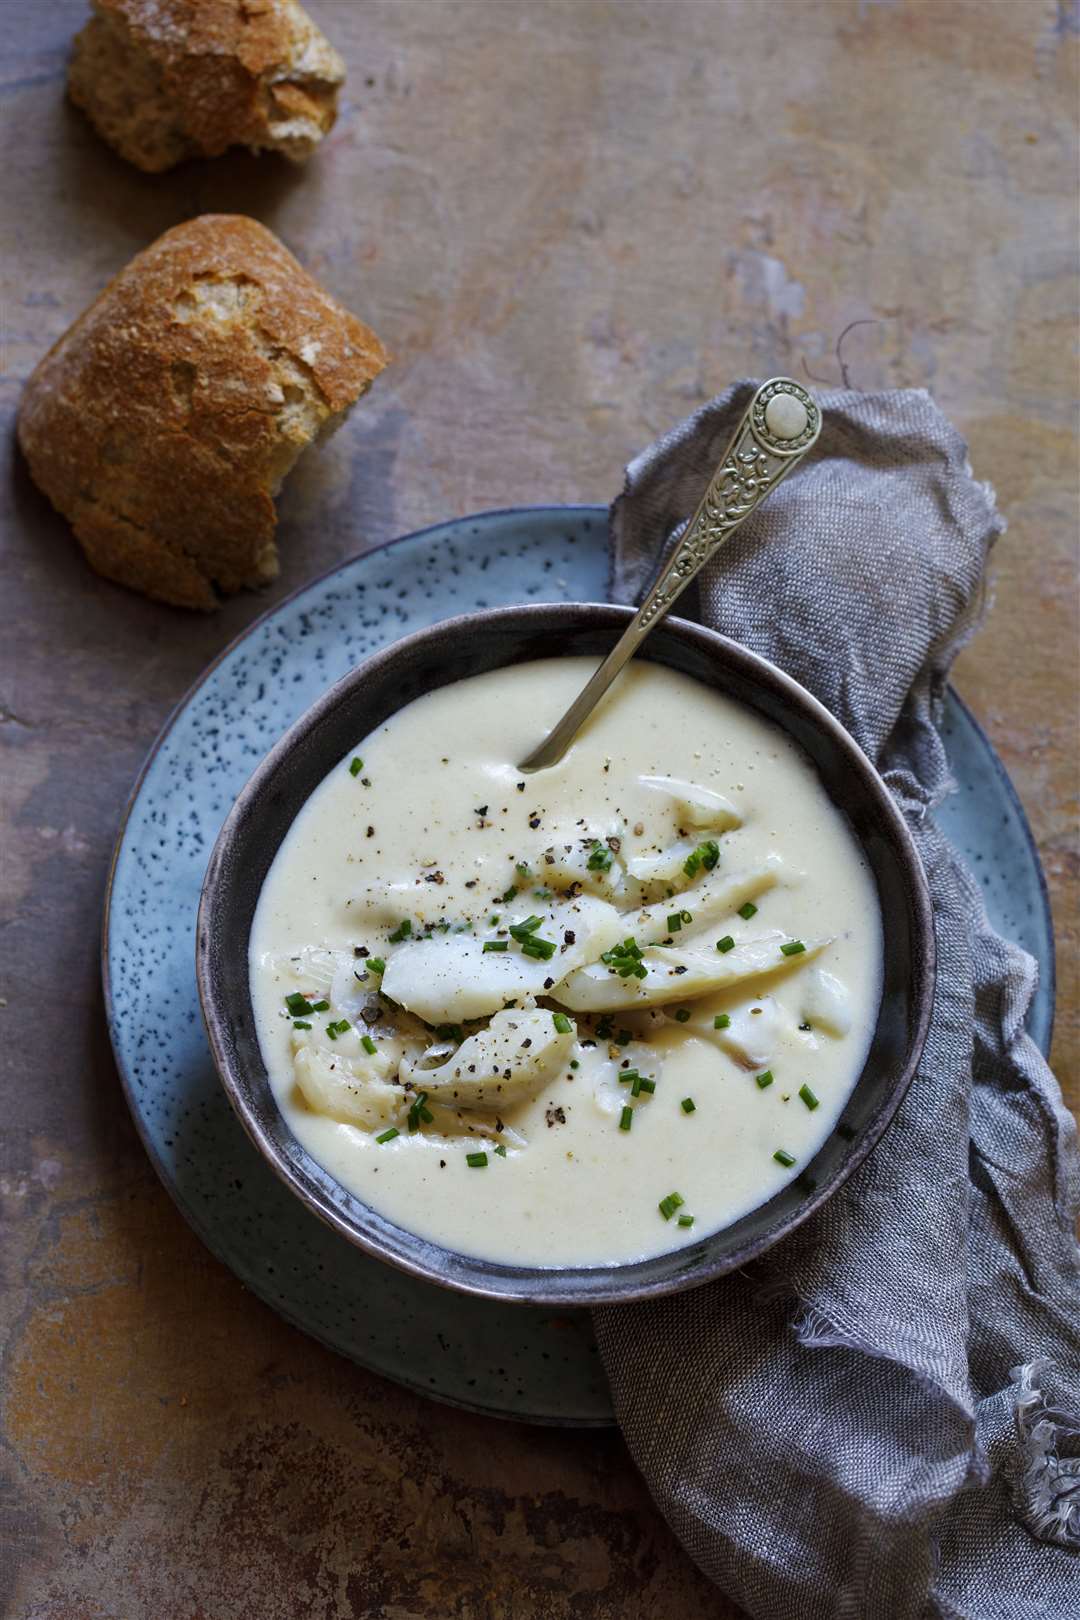 Cullen skink preparation is one of the skills set to be covered in the live stream session.